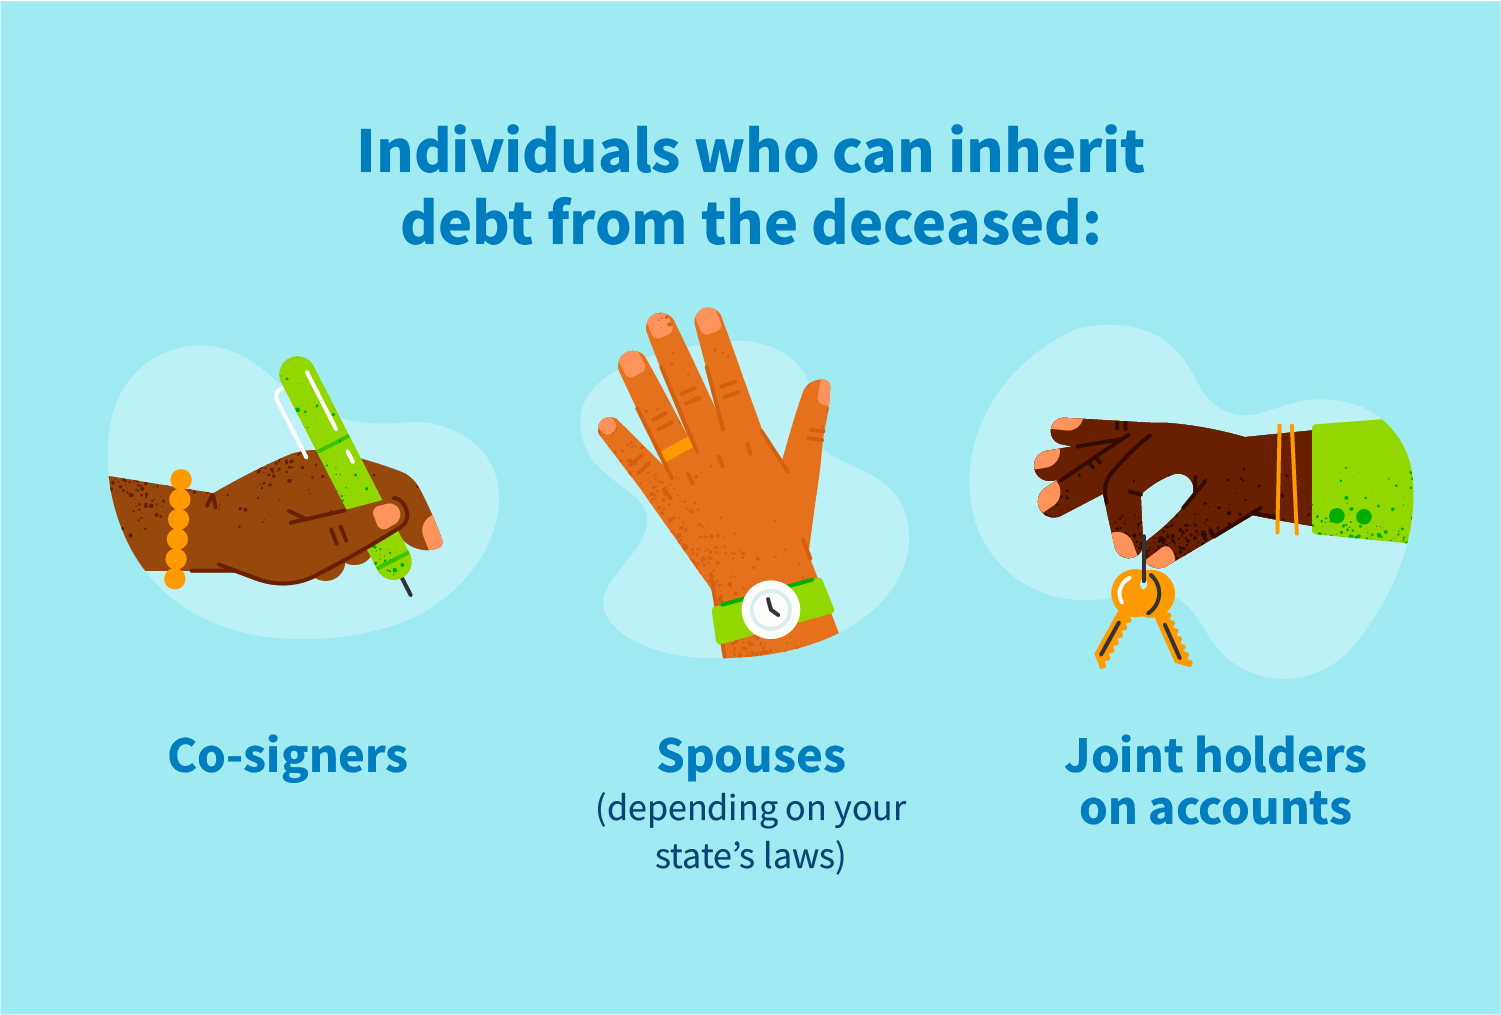 Individuals who can inherit debt from the deceased: Cosigners, spouses and joint holders on accounts.